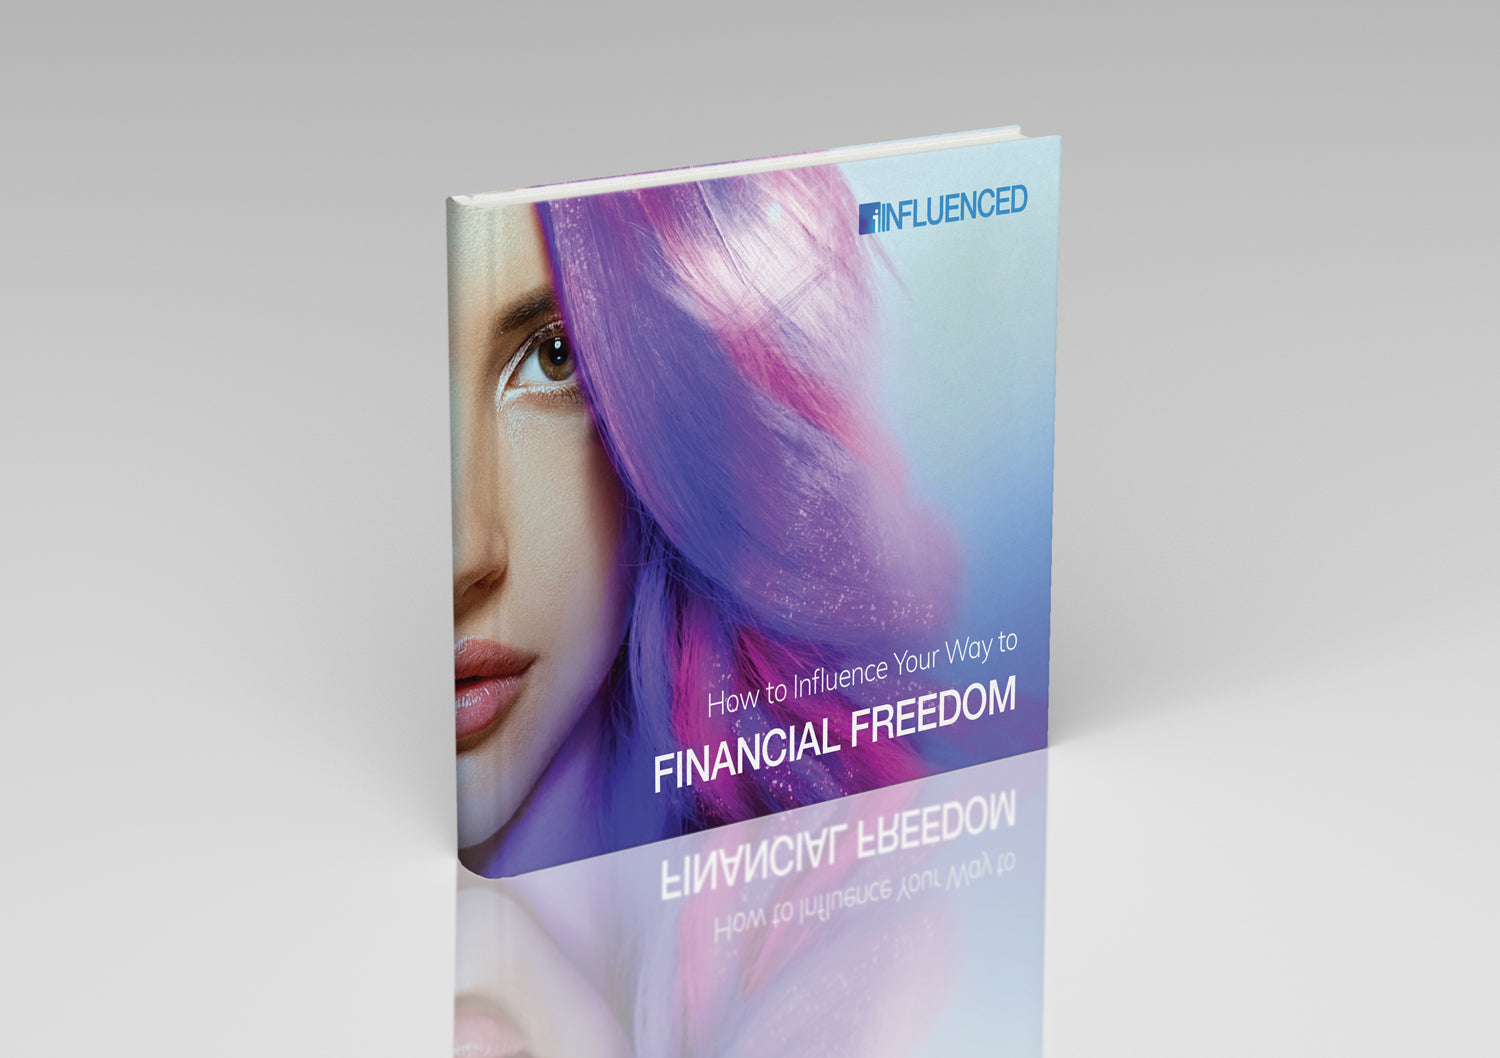 An e-book for Financial Freedom